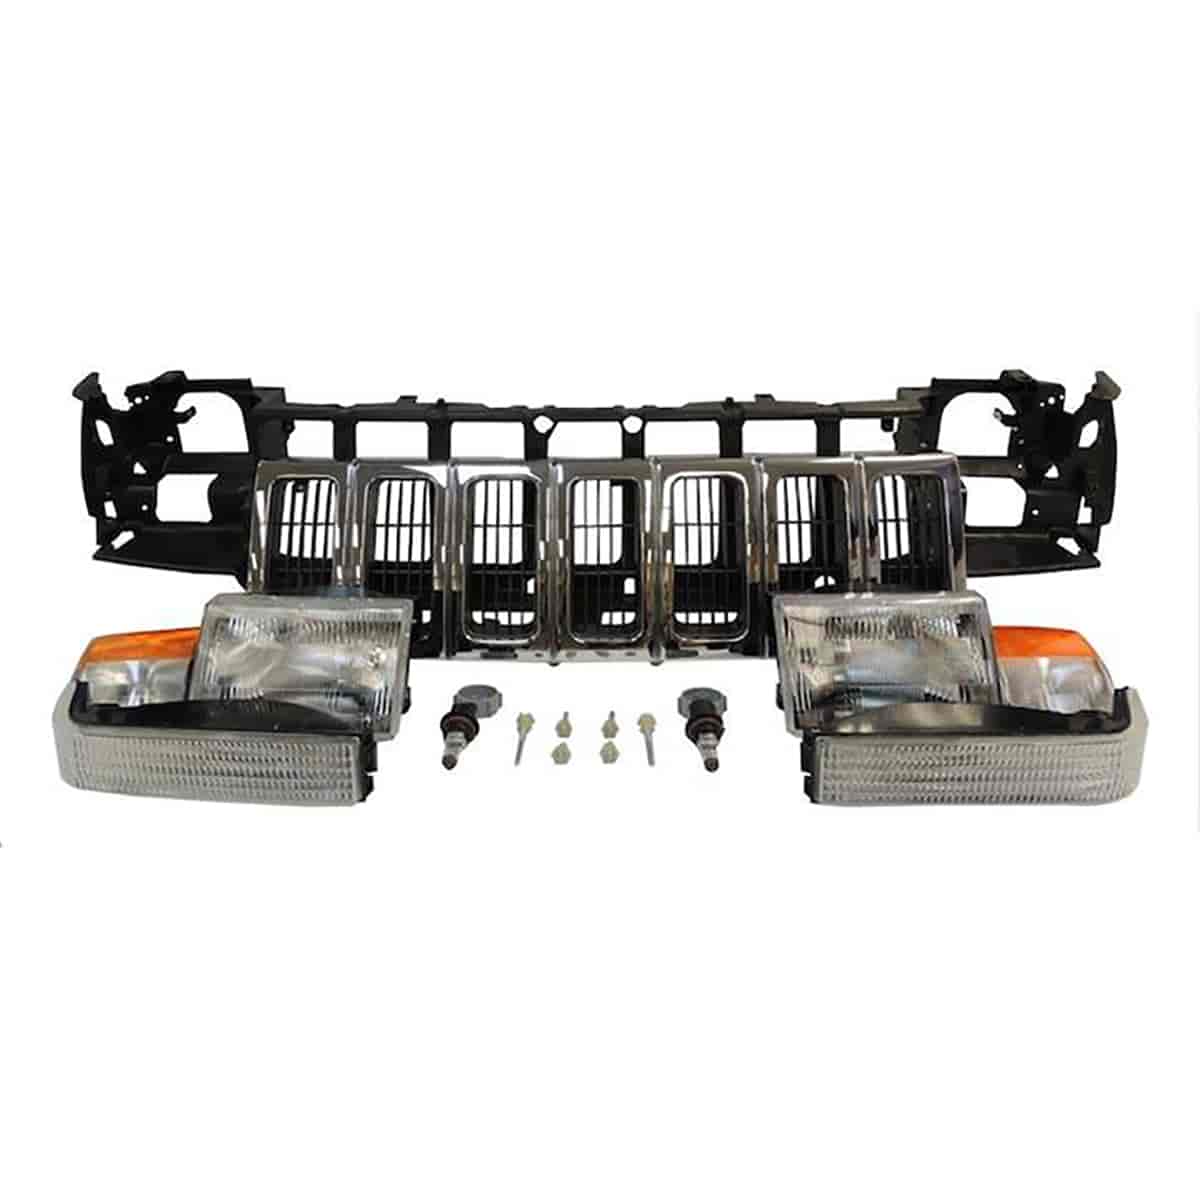 Complete Header Panel Kit for Jeep Grand Cherokee